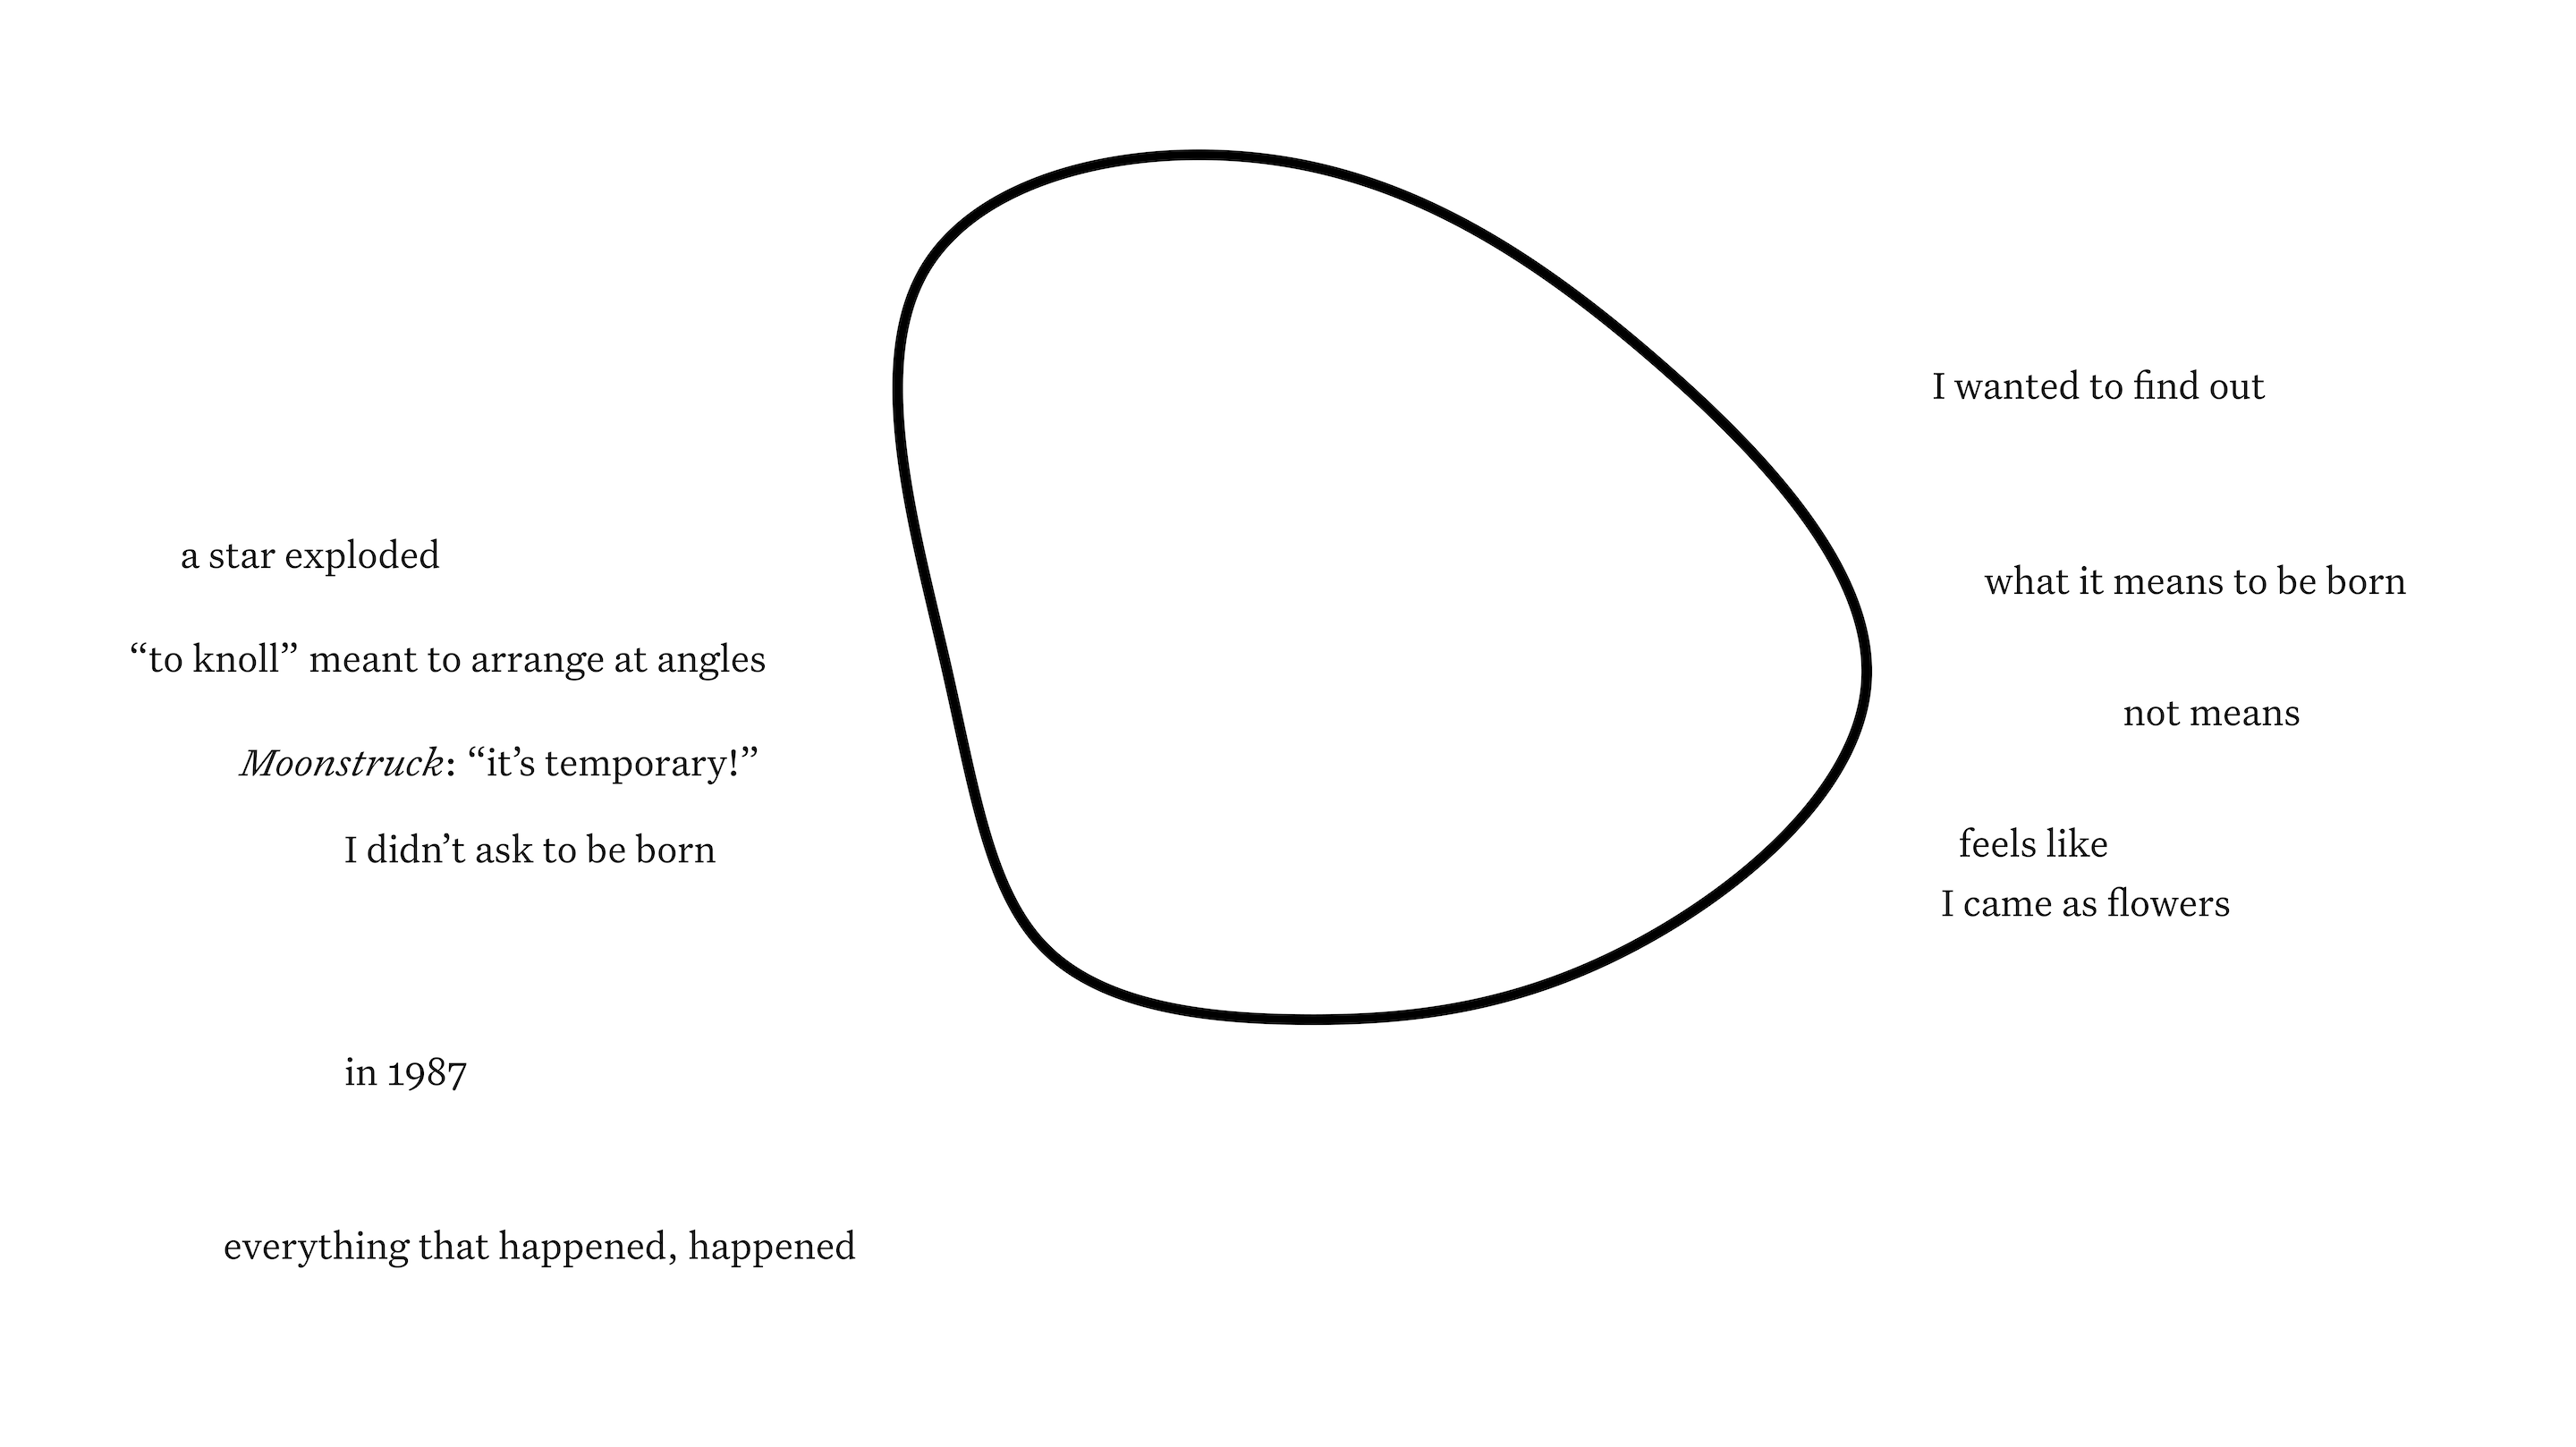 
 A round-ish, line-drawn shape appears in the center of the poem, looking like a blob. Horizontal lines of verse flank the left and right sides of the shape. Text, listed here clockwise starting in the noon position, but can be read in any direction starting from any point: “I wanted to find out / what it means to be born / not means / feels like / I came as flowers / everything that happened, happened / in 1987 / I didn’t ask to be born / Moonstruck: “it’s temporary!” / “to knoll” meant to arrange at angles / a star exploded”
 